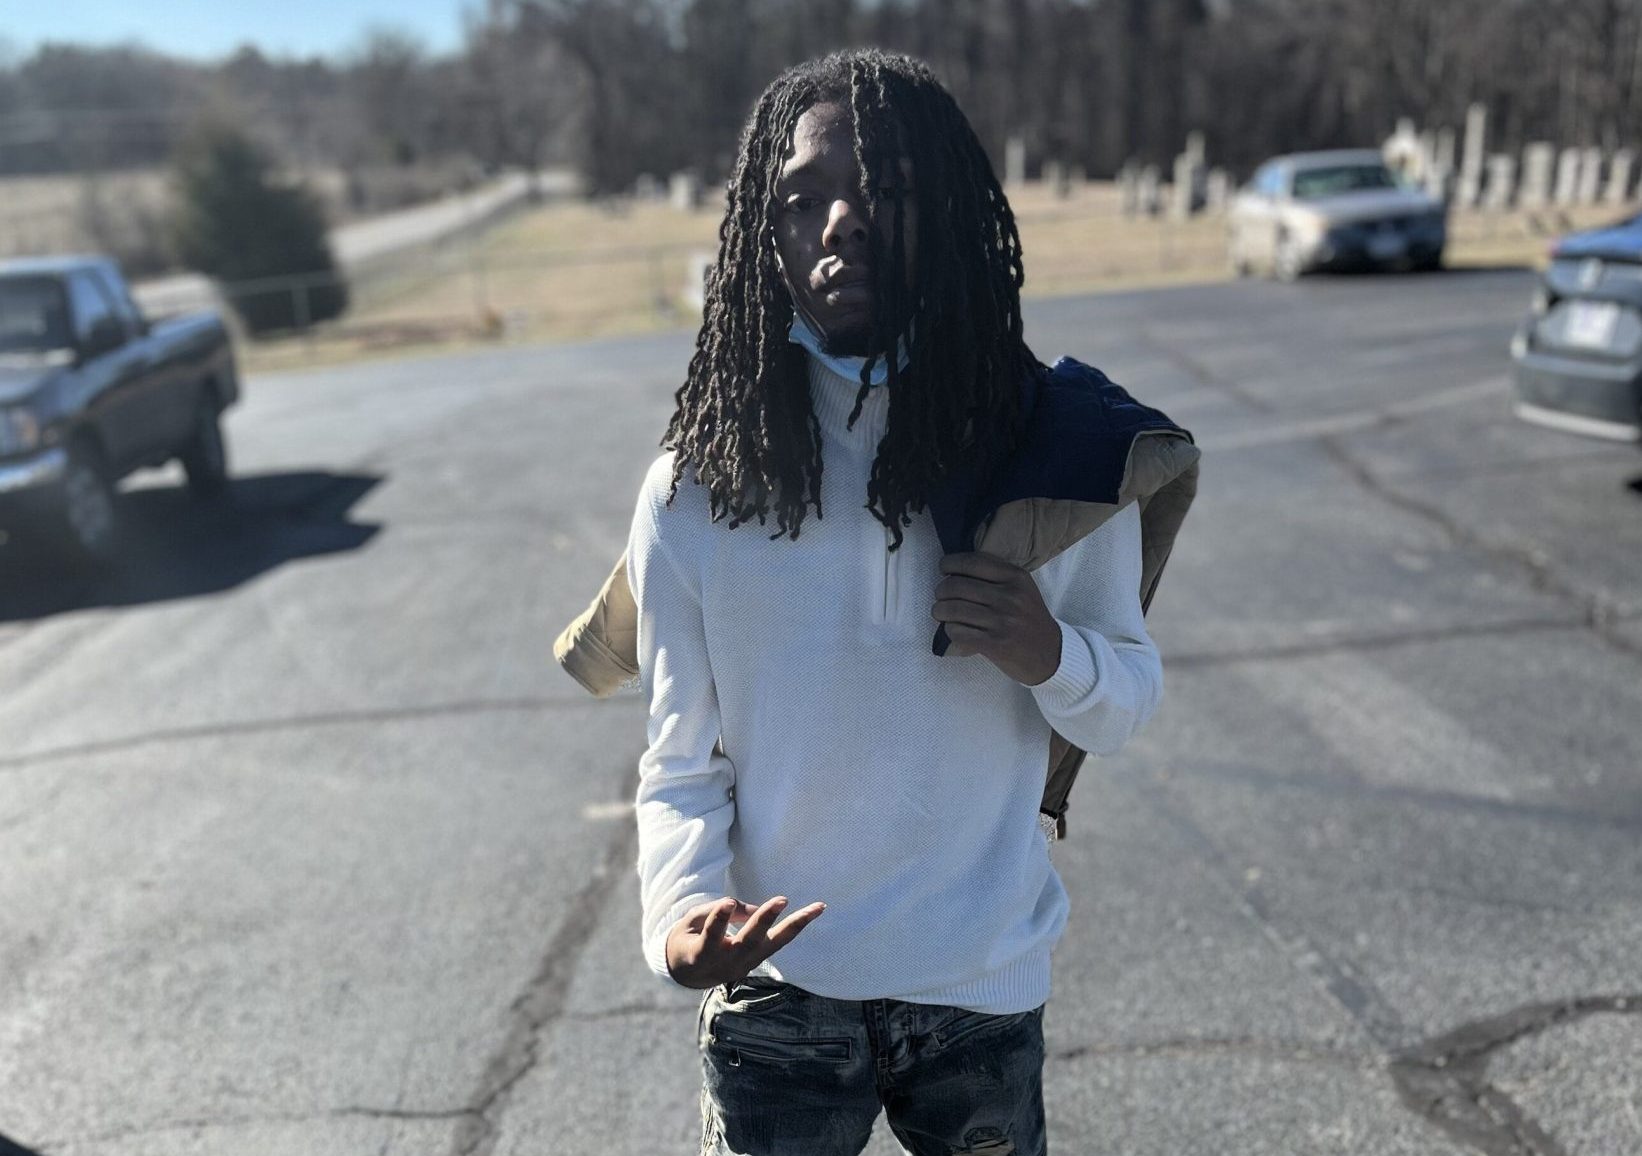 Introducing 3FE Camgod: A Rising Star from Bolivar, Tennessee